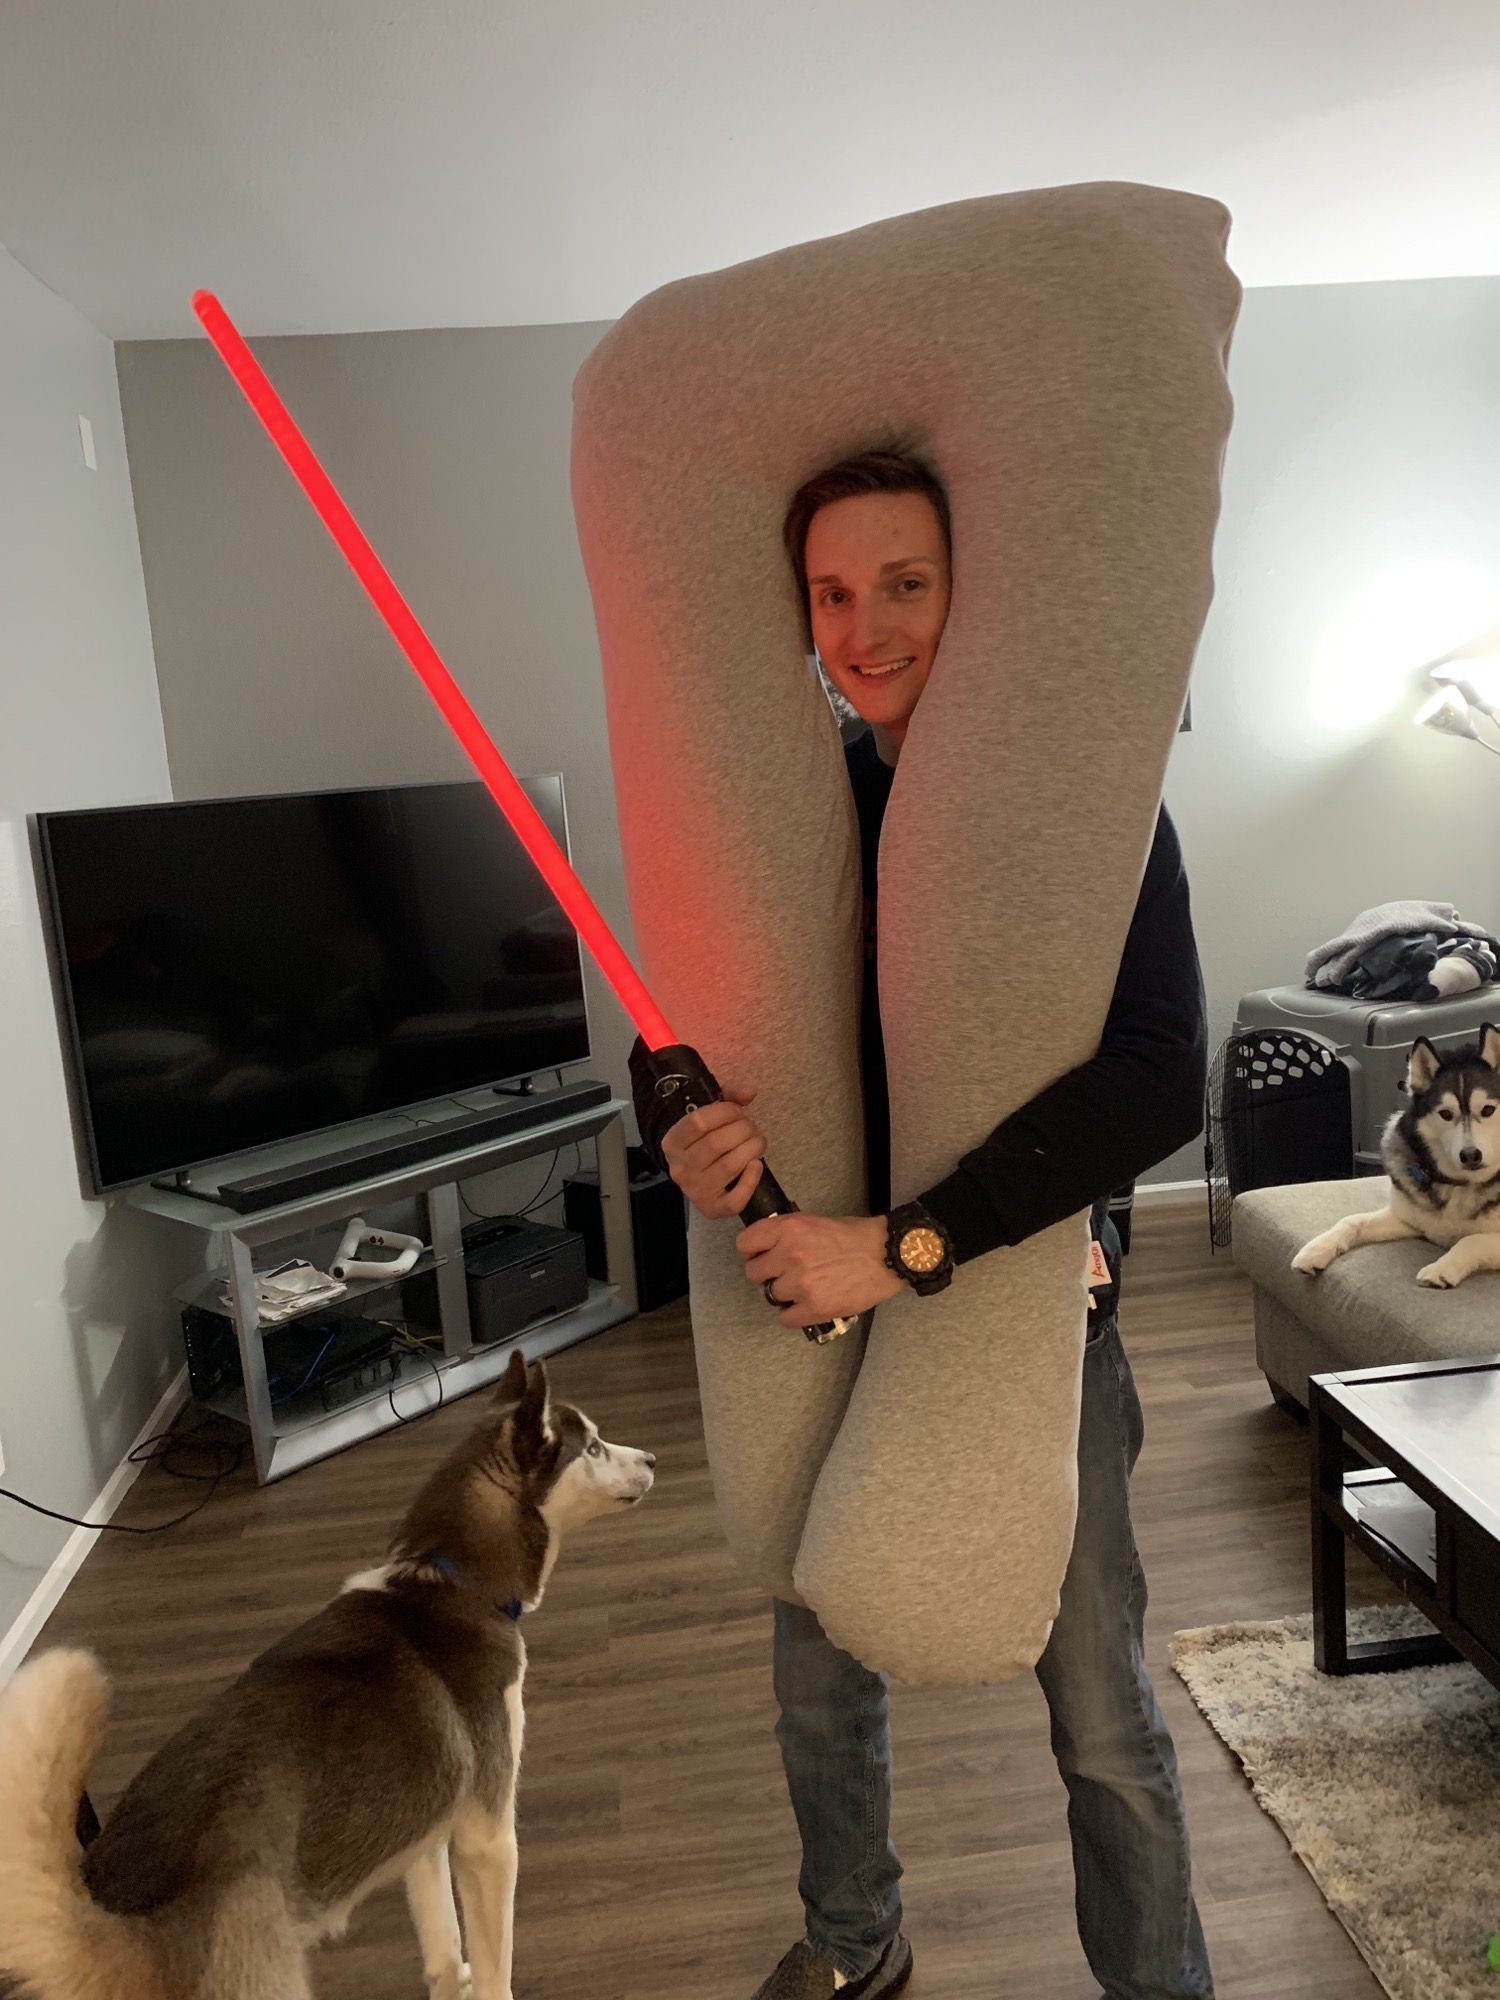 My wife just got a pregnancy pillow - which prompted me to try and cosplay as aayla secura I guess